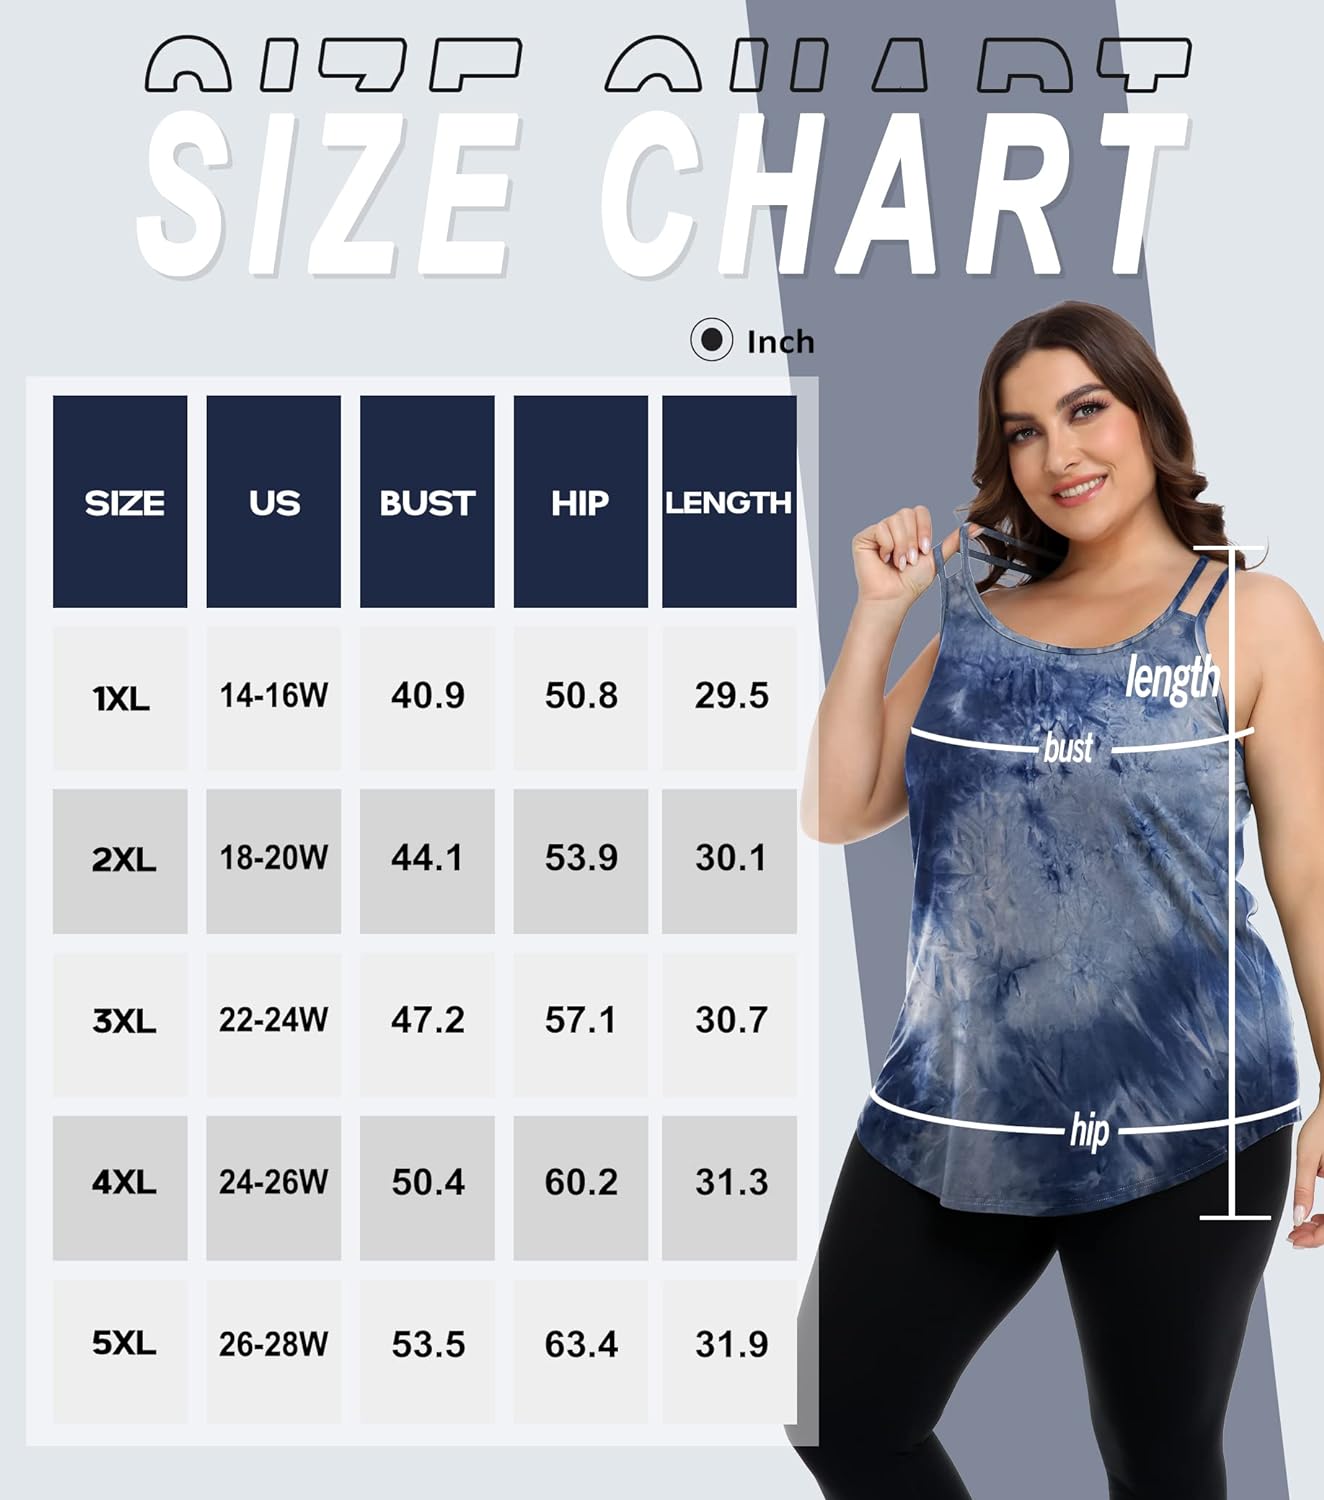 Foreyond Women's Plus Size Workout Tank Tops: A Stylish and Comfortable Choice for Active Women